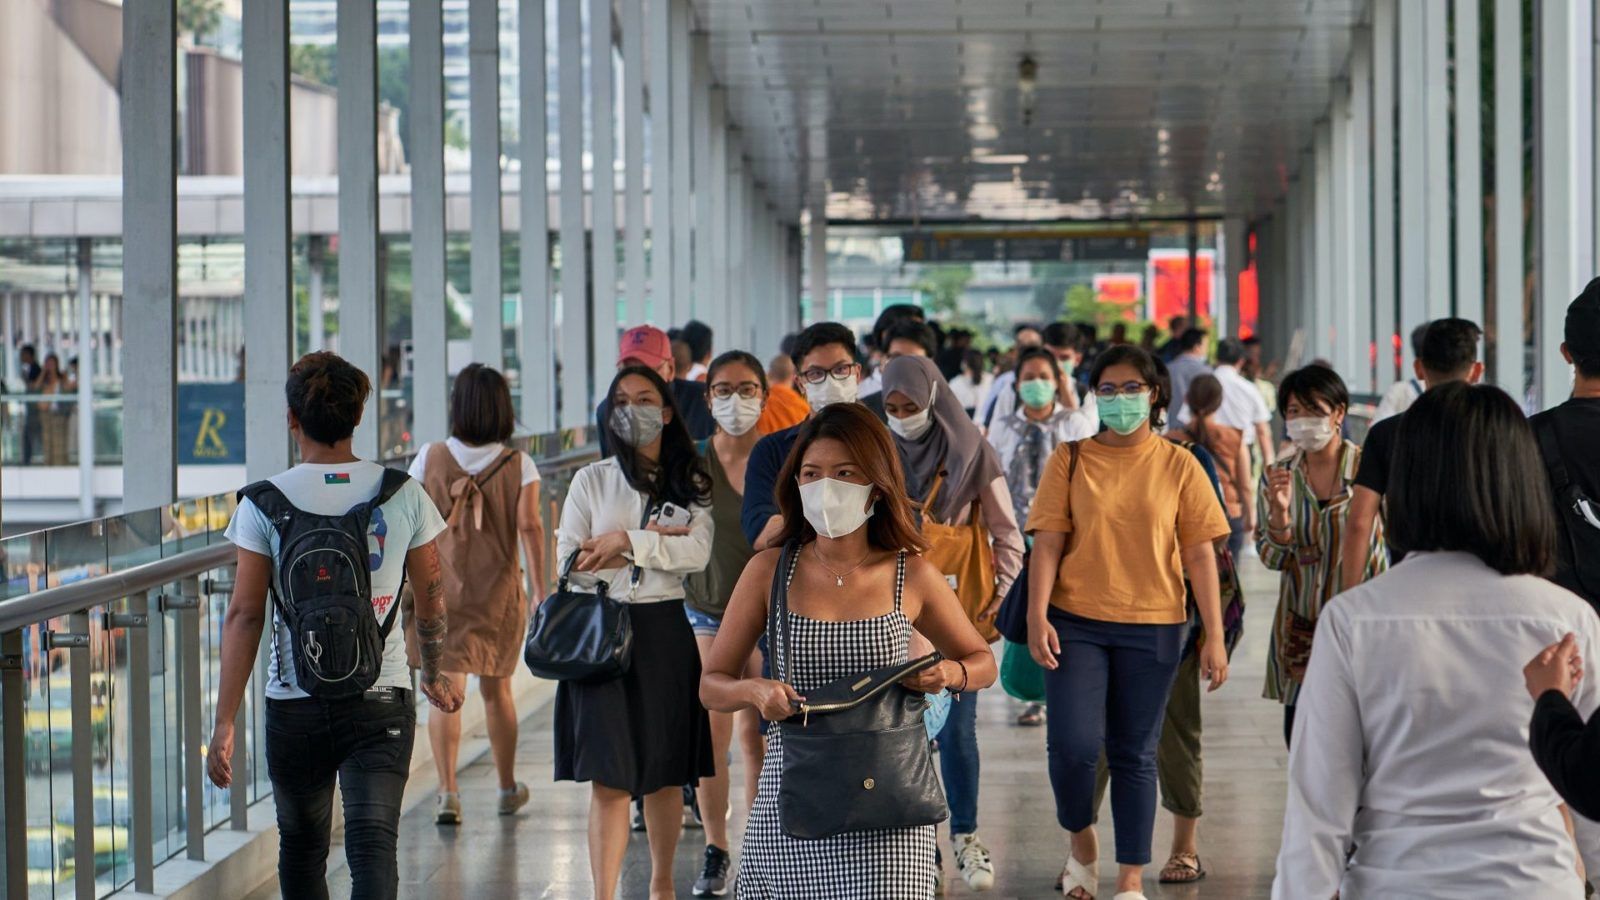 Thailand to ease Covid restrictions by removing the mask mandate